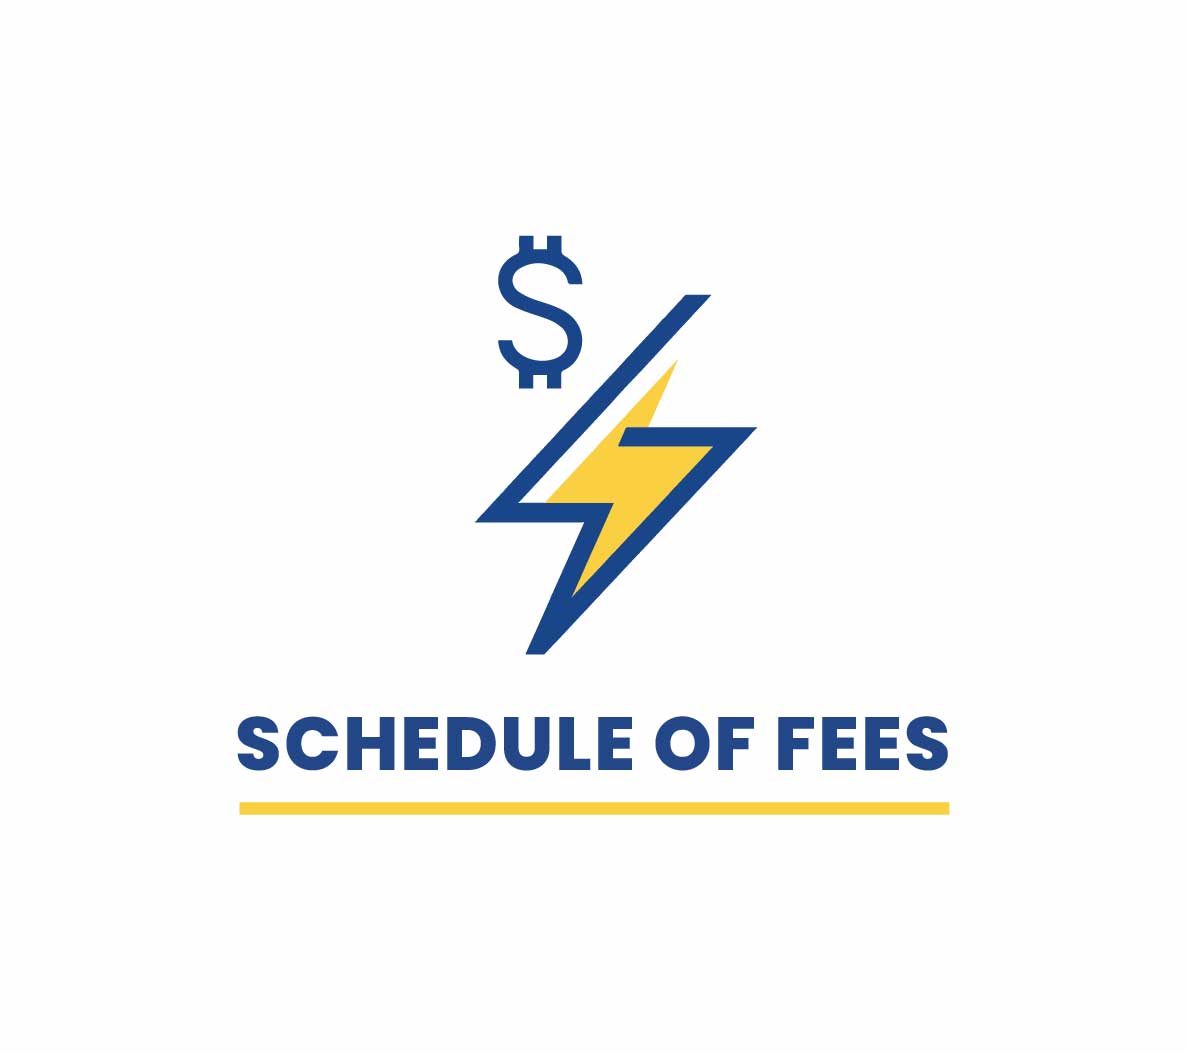 Click here to request schedule of fees